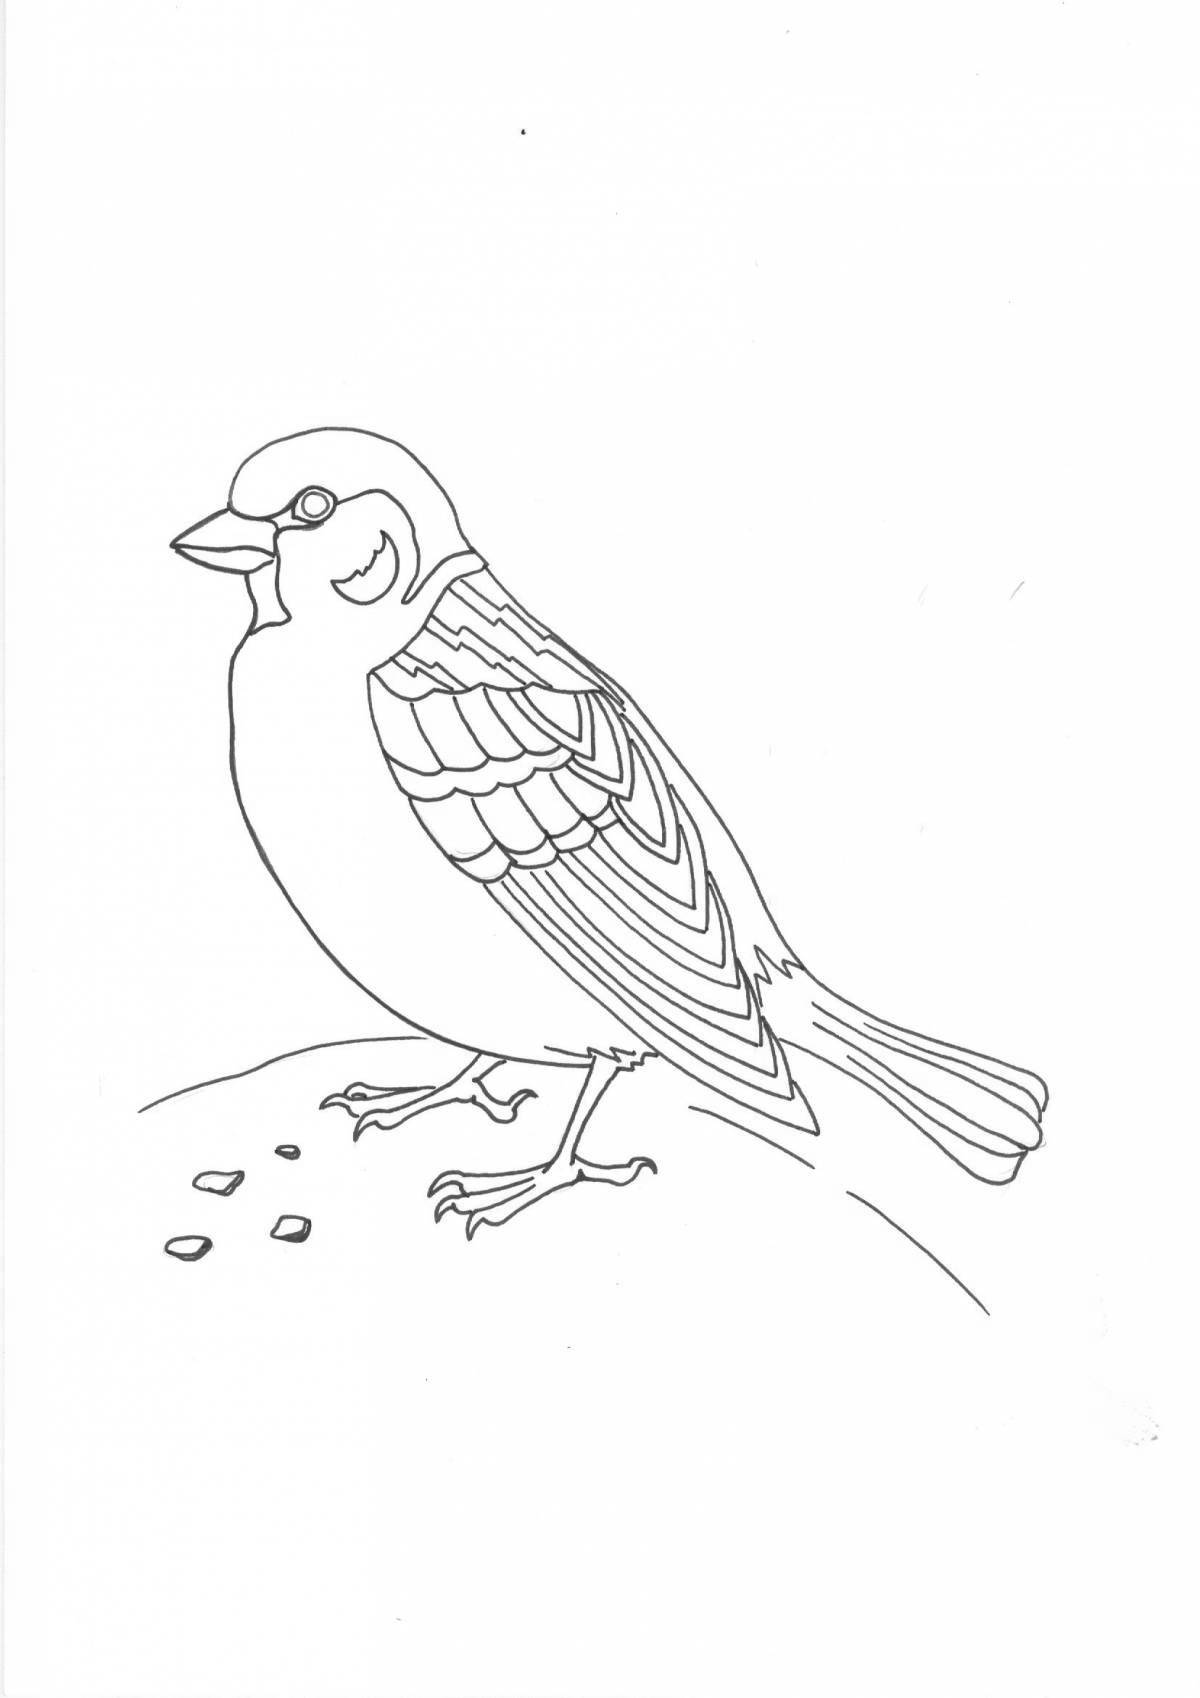 Majestic disheveled sparrow coloring page